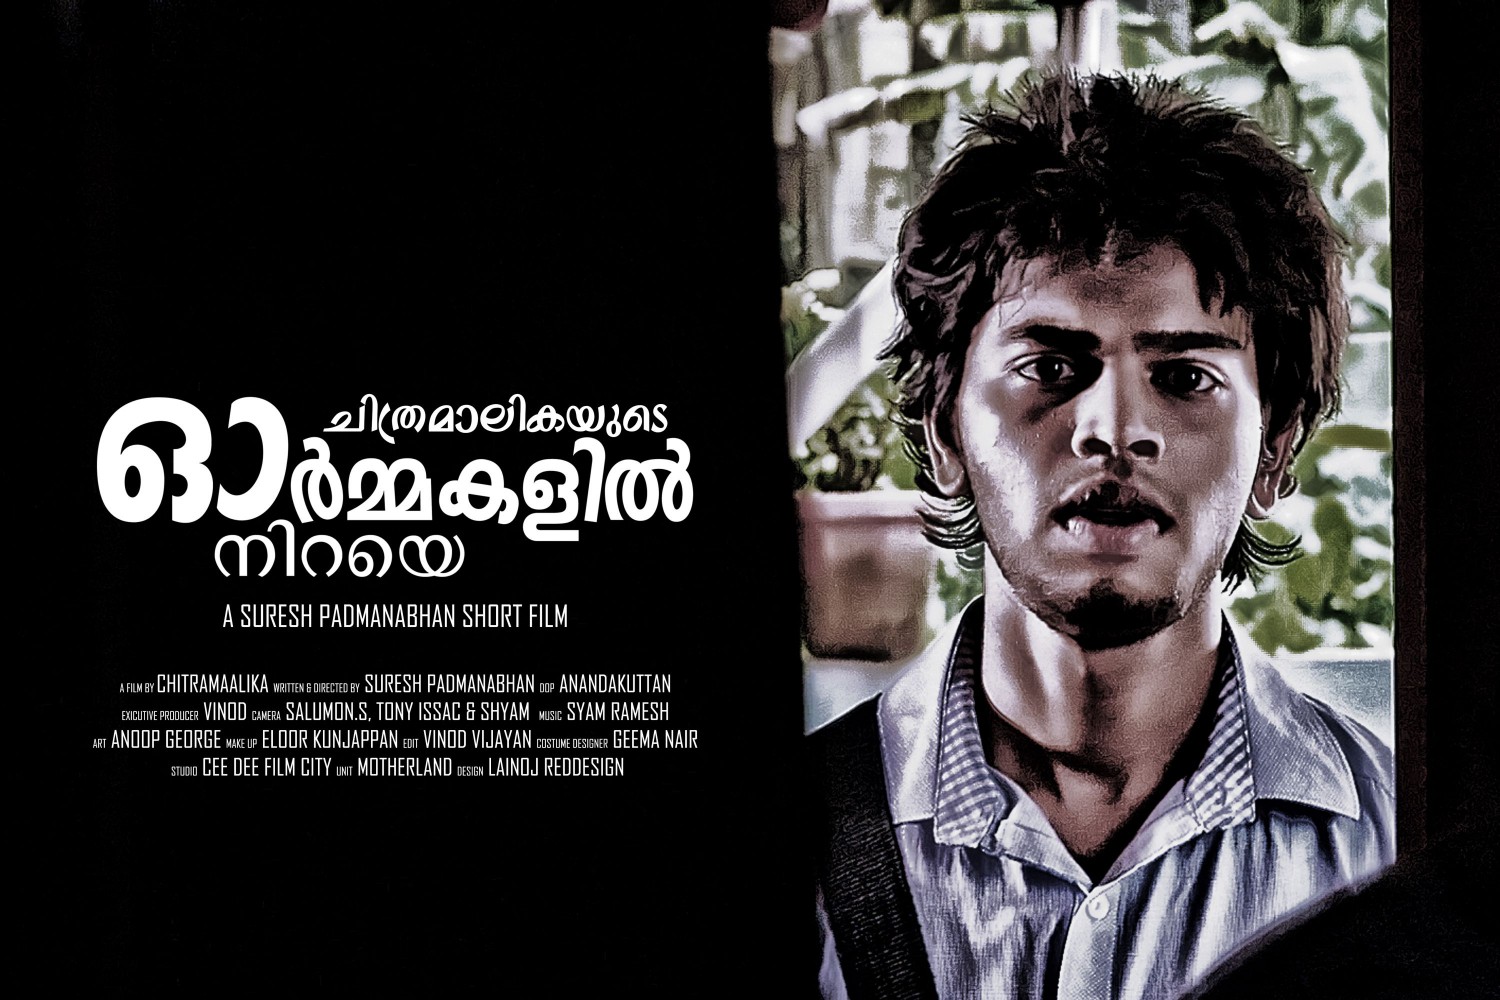 Extra Large Movie Poster Image for Ormakalil Niraye